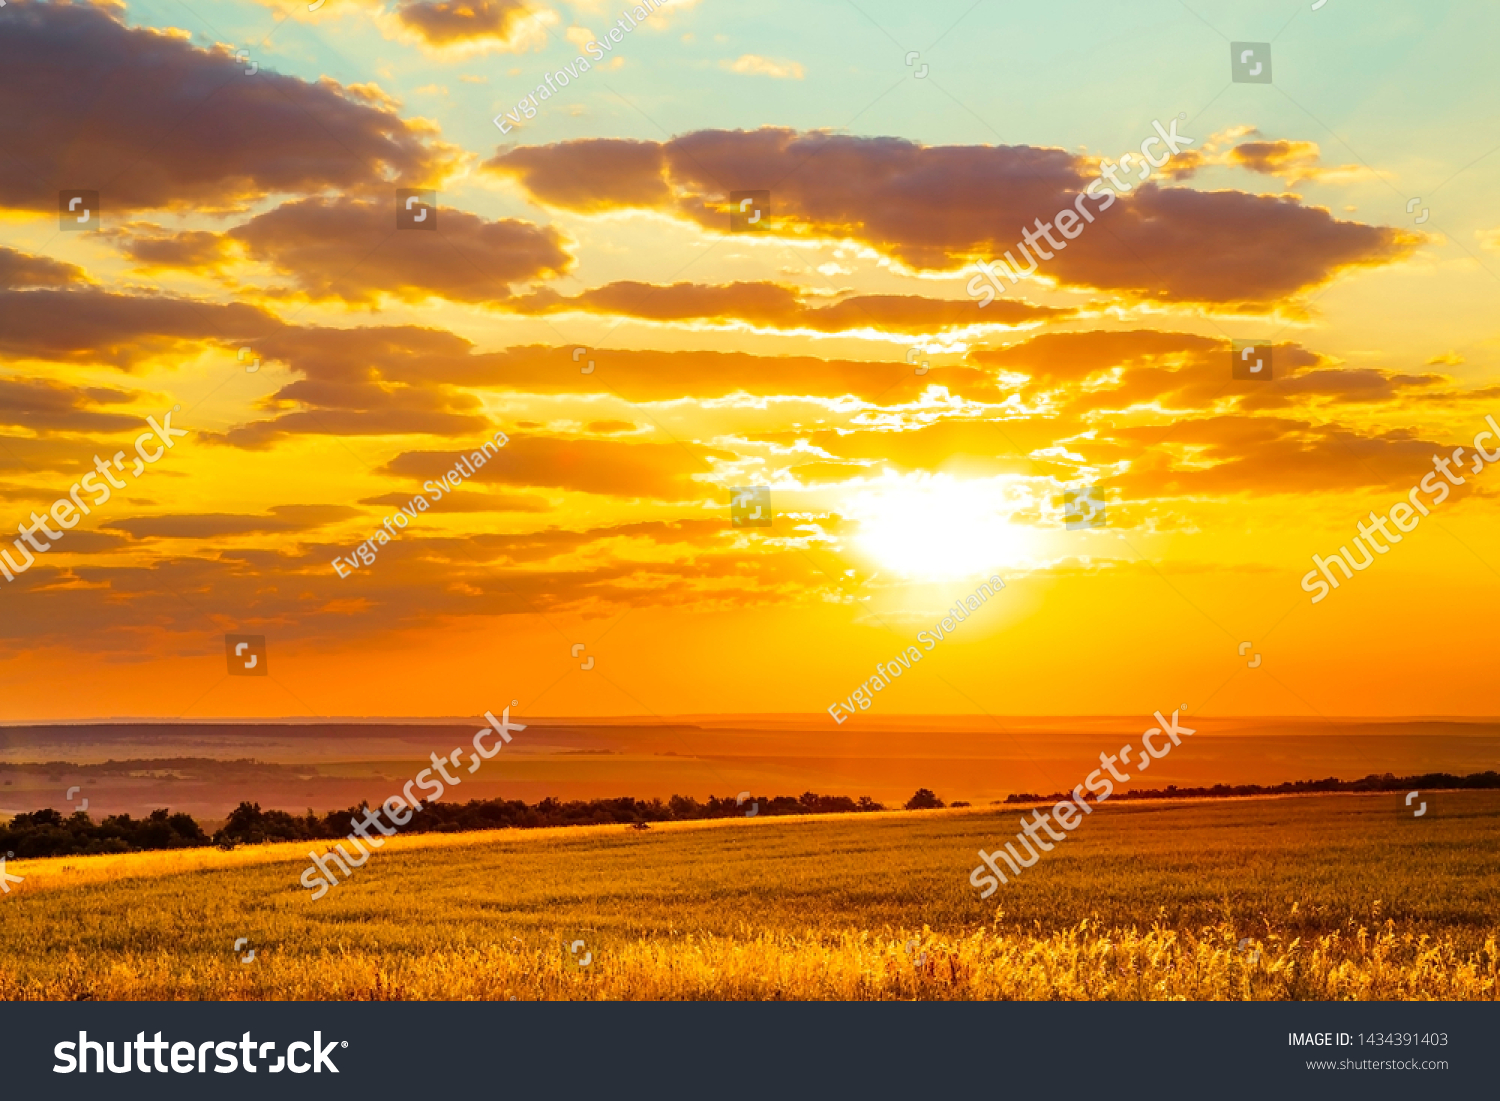 Saratov region, travel, landscape and nature of Russia. Yellow golden orange dramatic dawn at dawn or dusk over endless fields, hills, meadows. The sun rises in the morning above the horizon #1434391403